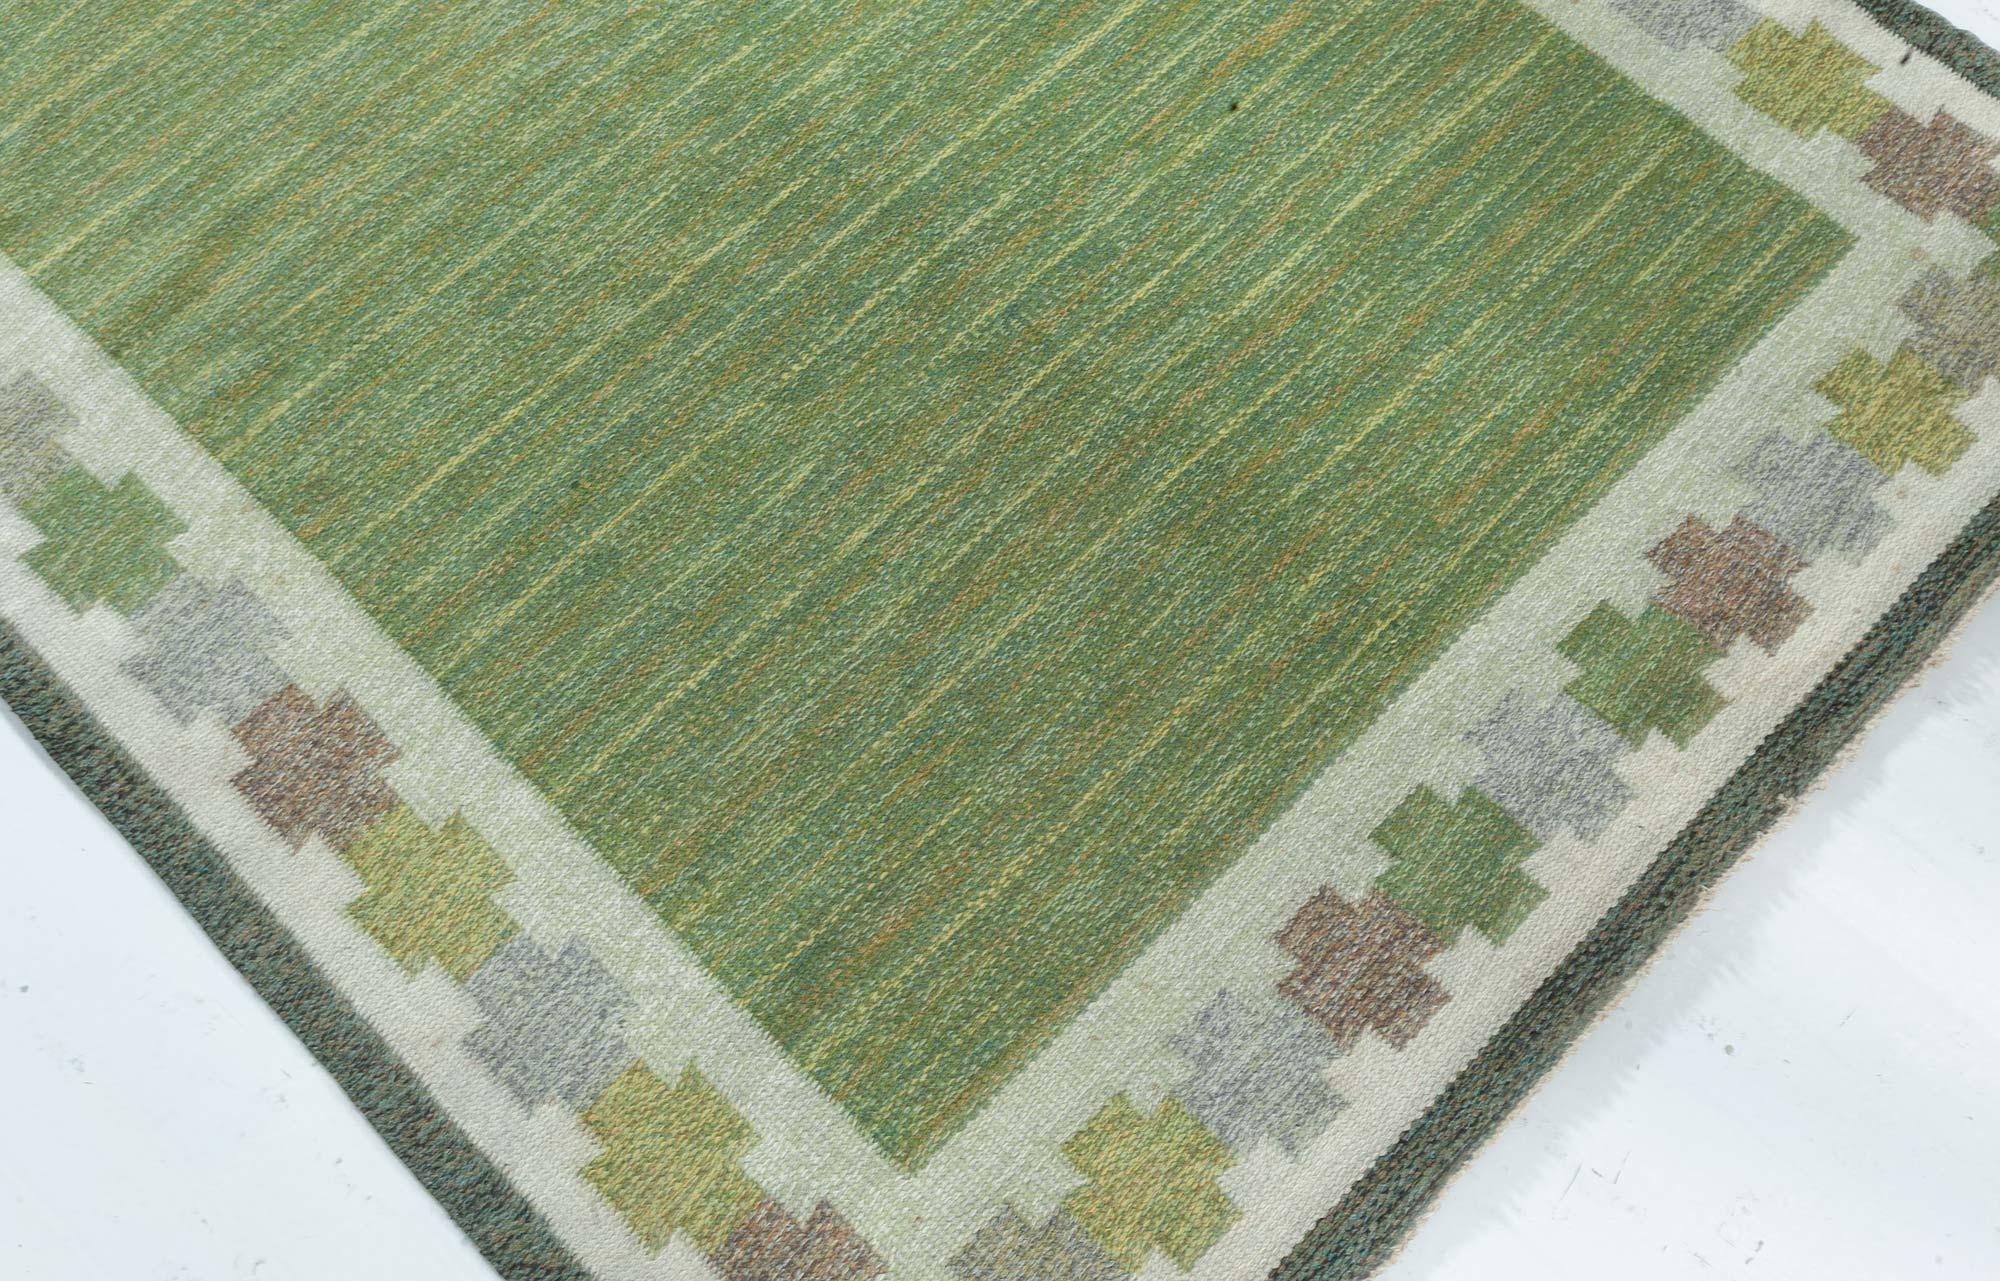 Midcentury Swedish Green Flat Woven Rug by Ingegerd Silow at Doris Leslie Blau In Good Condition In New York, NY